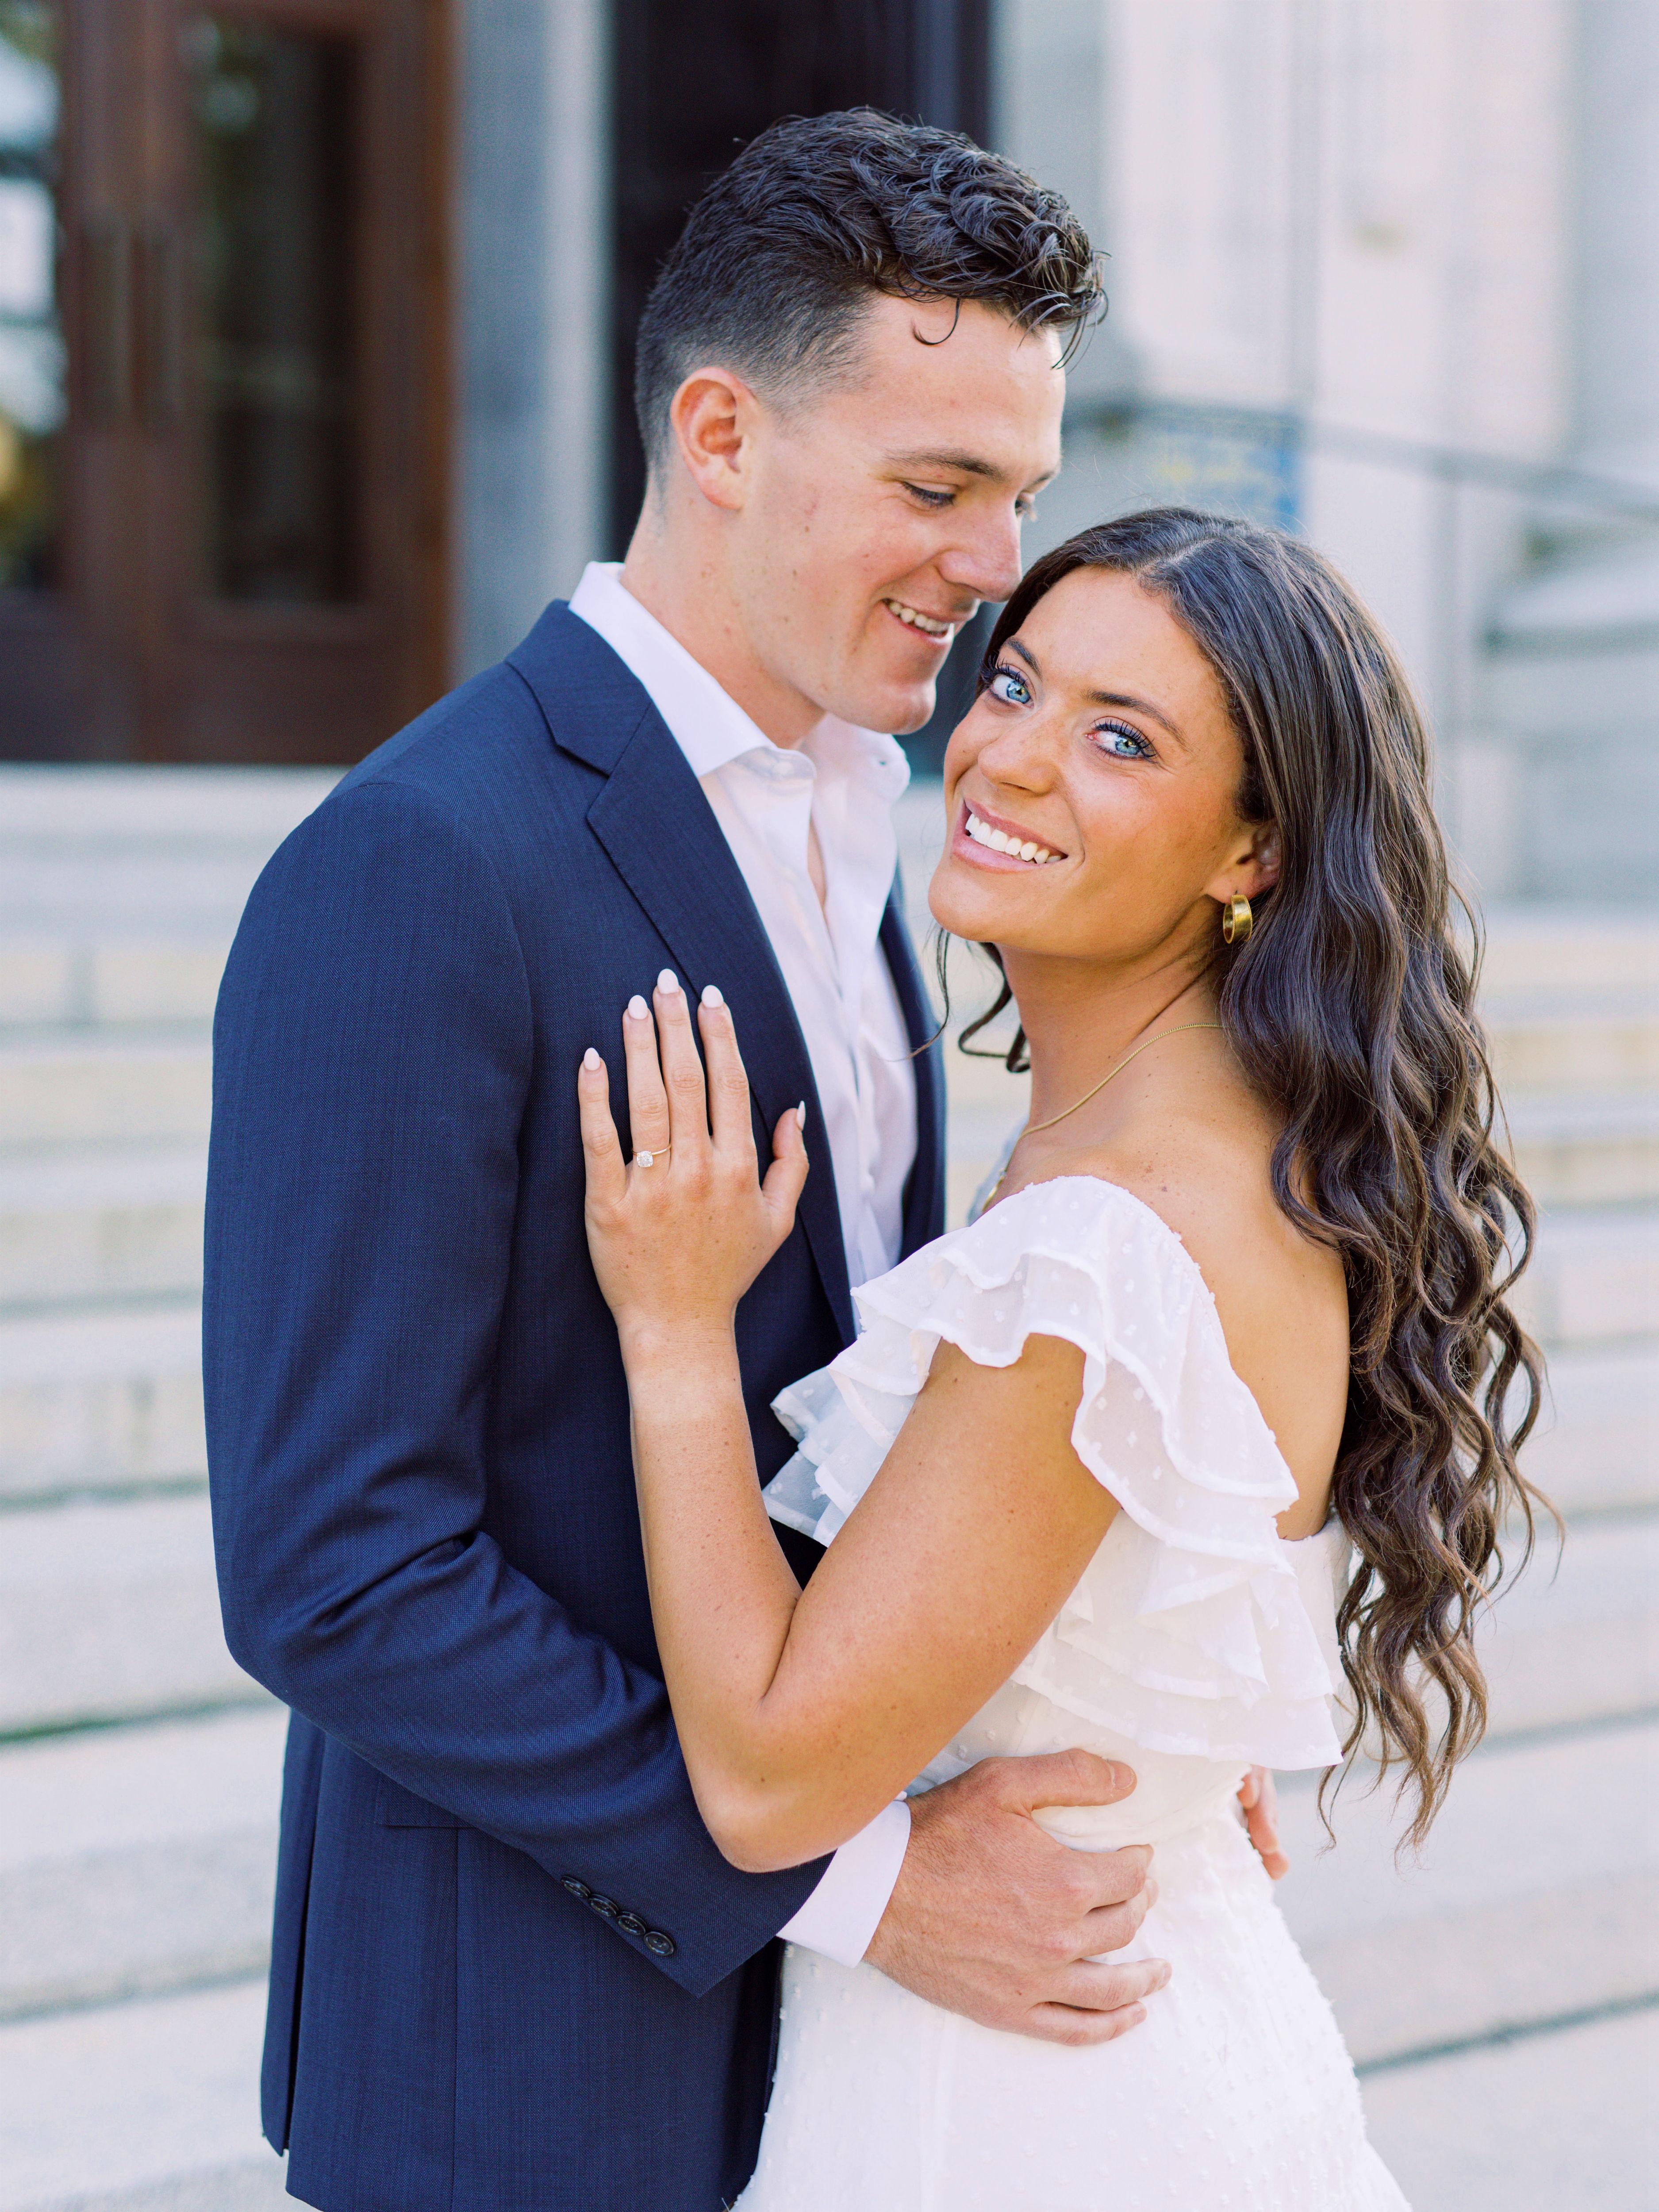 The Wedding Website of Natalie Markoff and Jack Sherman